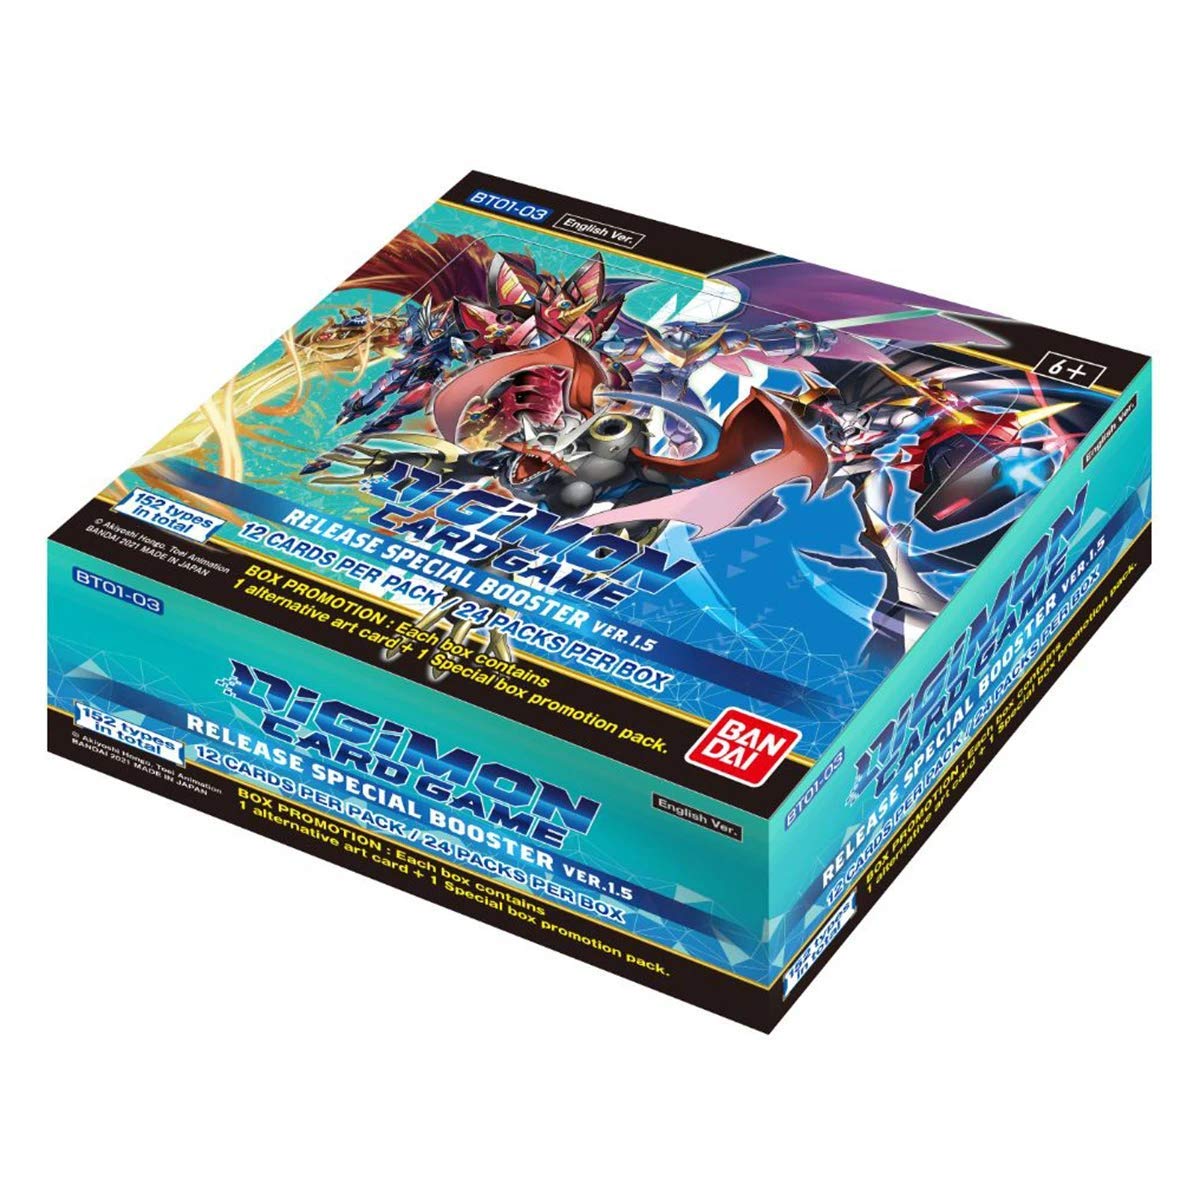 DIGIMON CARD GAME - RELEASE SPECIAL BOOSTER Ver.1.5 - BOOSTER BOX [BT01-03] | Viridian Forest